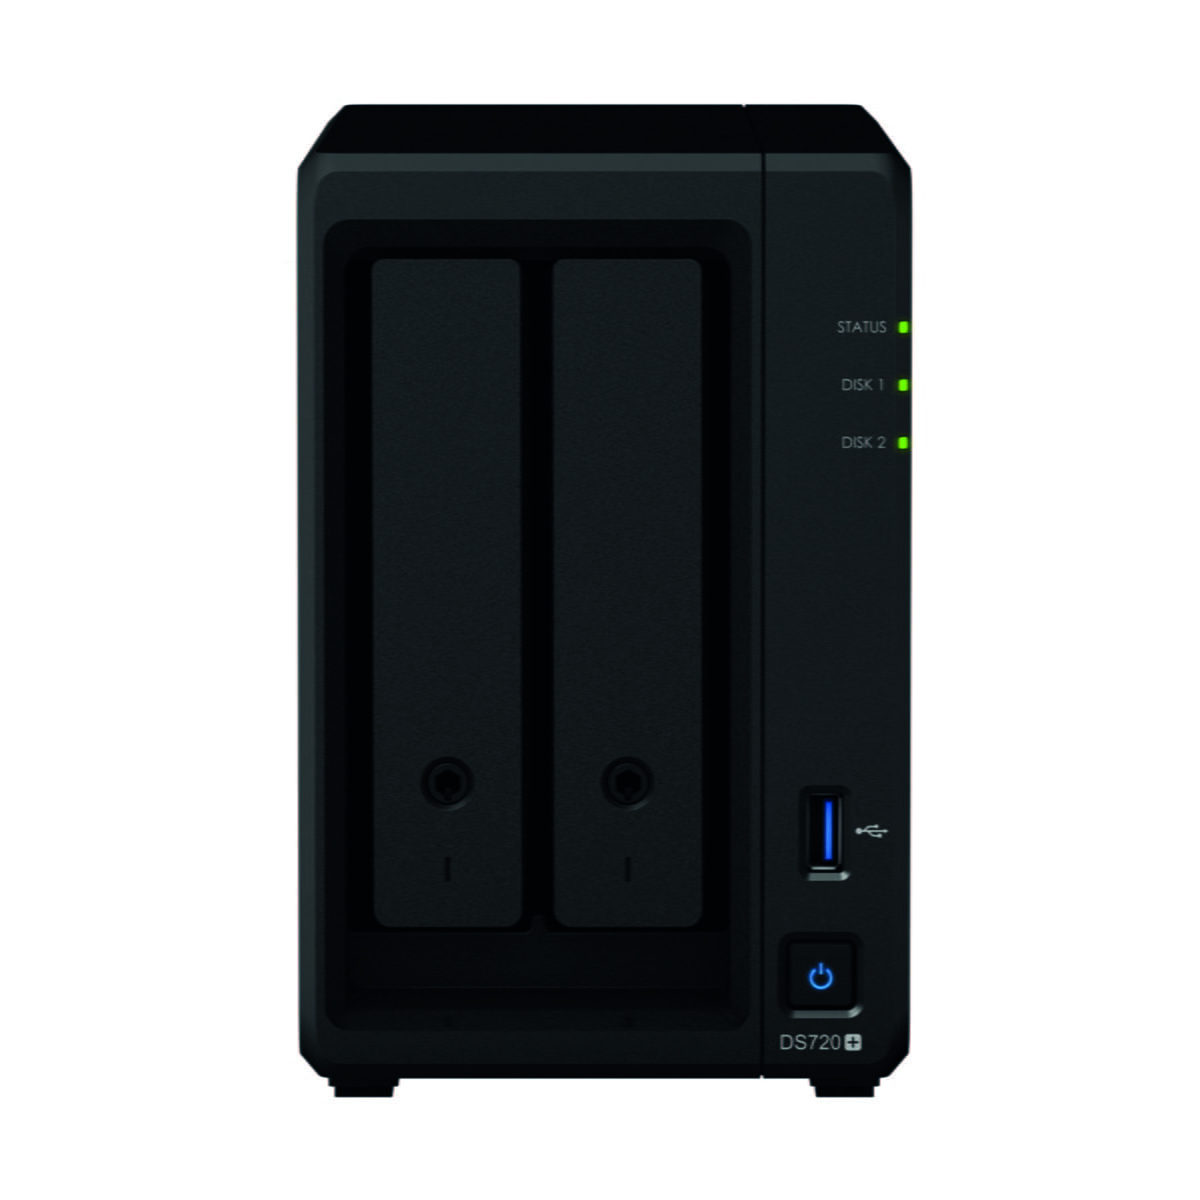 Serveur NAS Synology DiskStation DS720+ 2 Baies